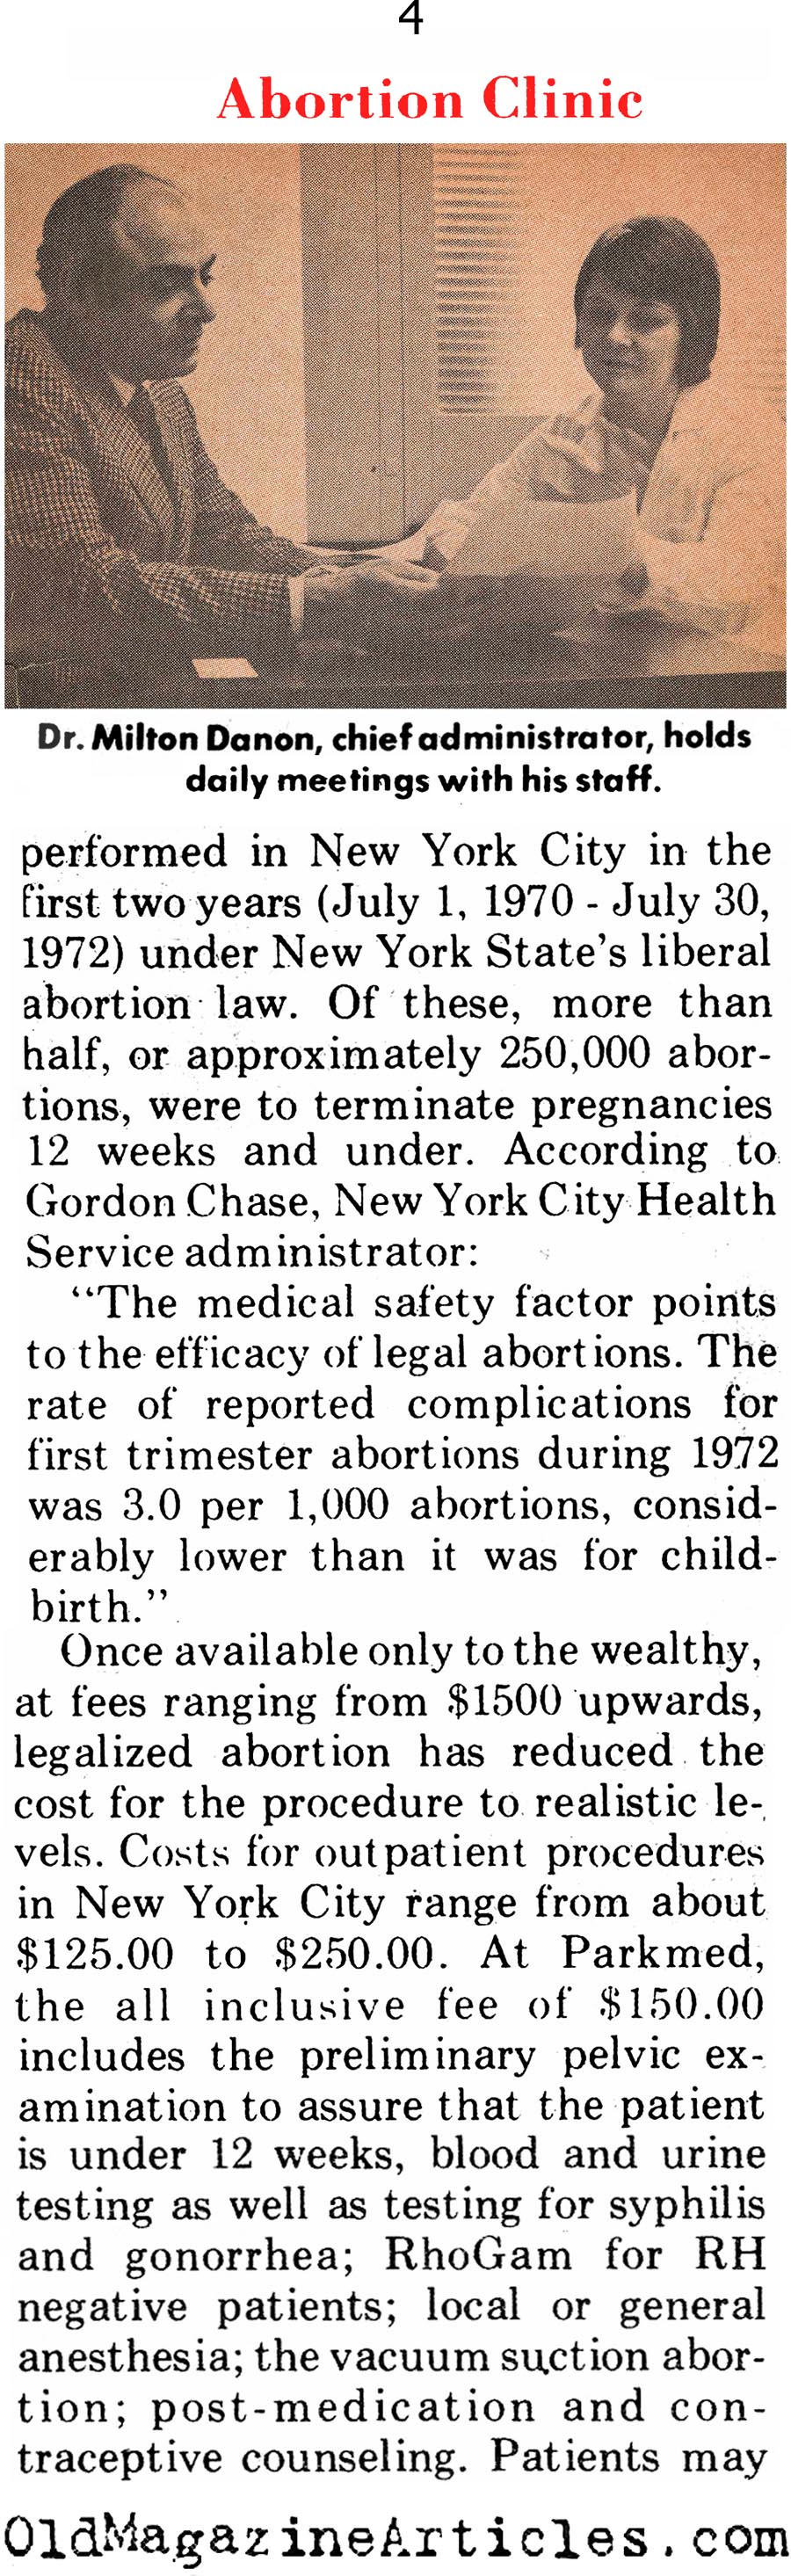 The Largest Abortion Mill (Pageant Magazine, 1973)